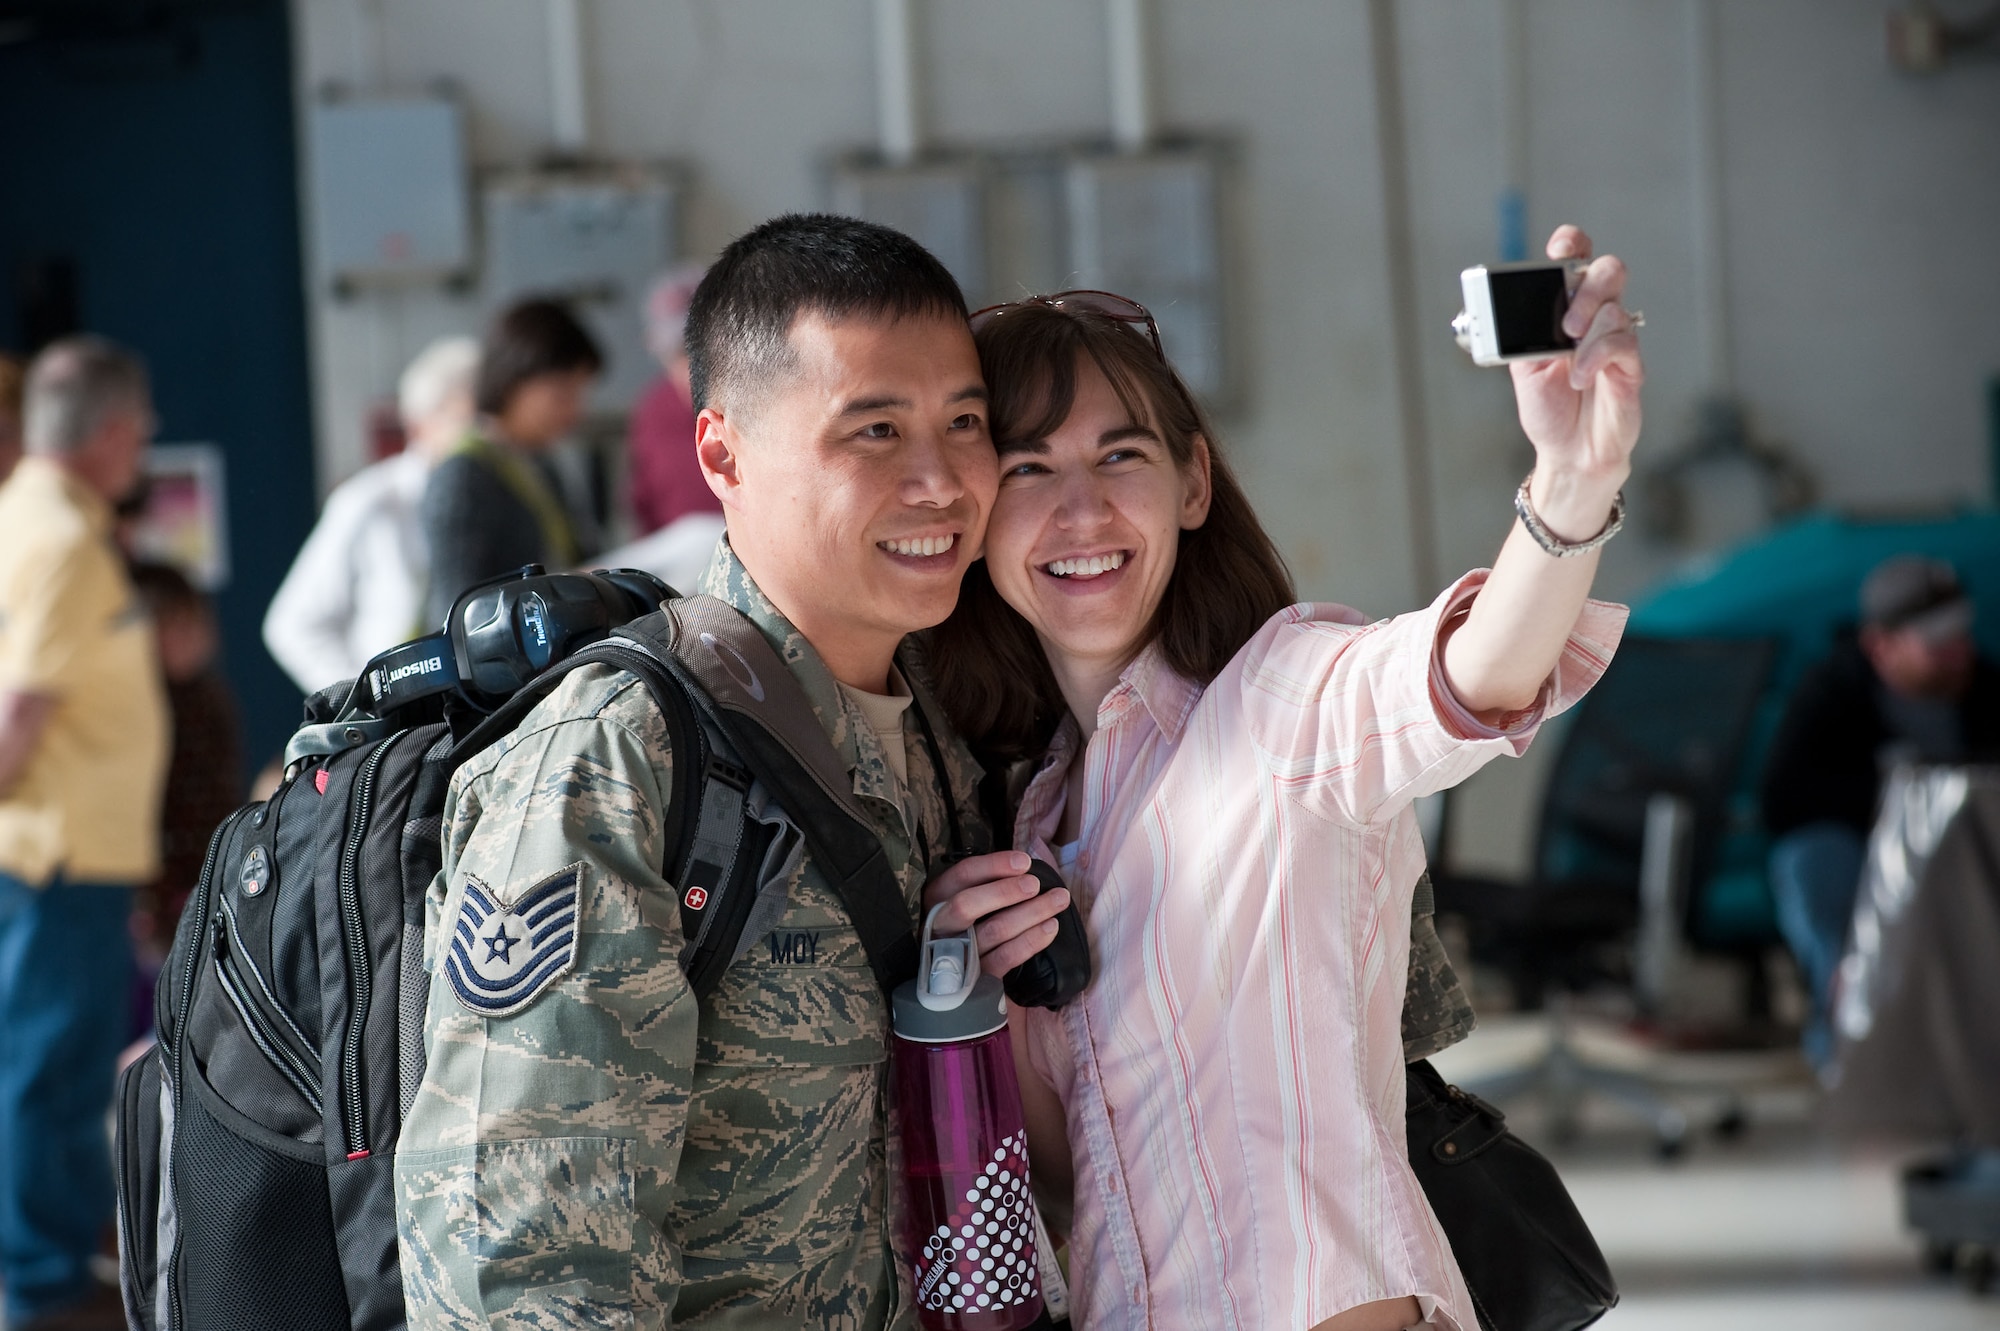 Technical Sgt. Clifton Moy, 140th Maintenance Squadron, Colorado Air National Guard, Buckley Air Force Base, Aurora, CO, poses for a self-portrait with fianc? Jessica. (U.S. Air Force photo/Master Sgt. John Nimmo, Sr.) (RELEASED)